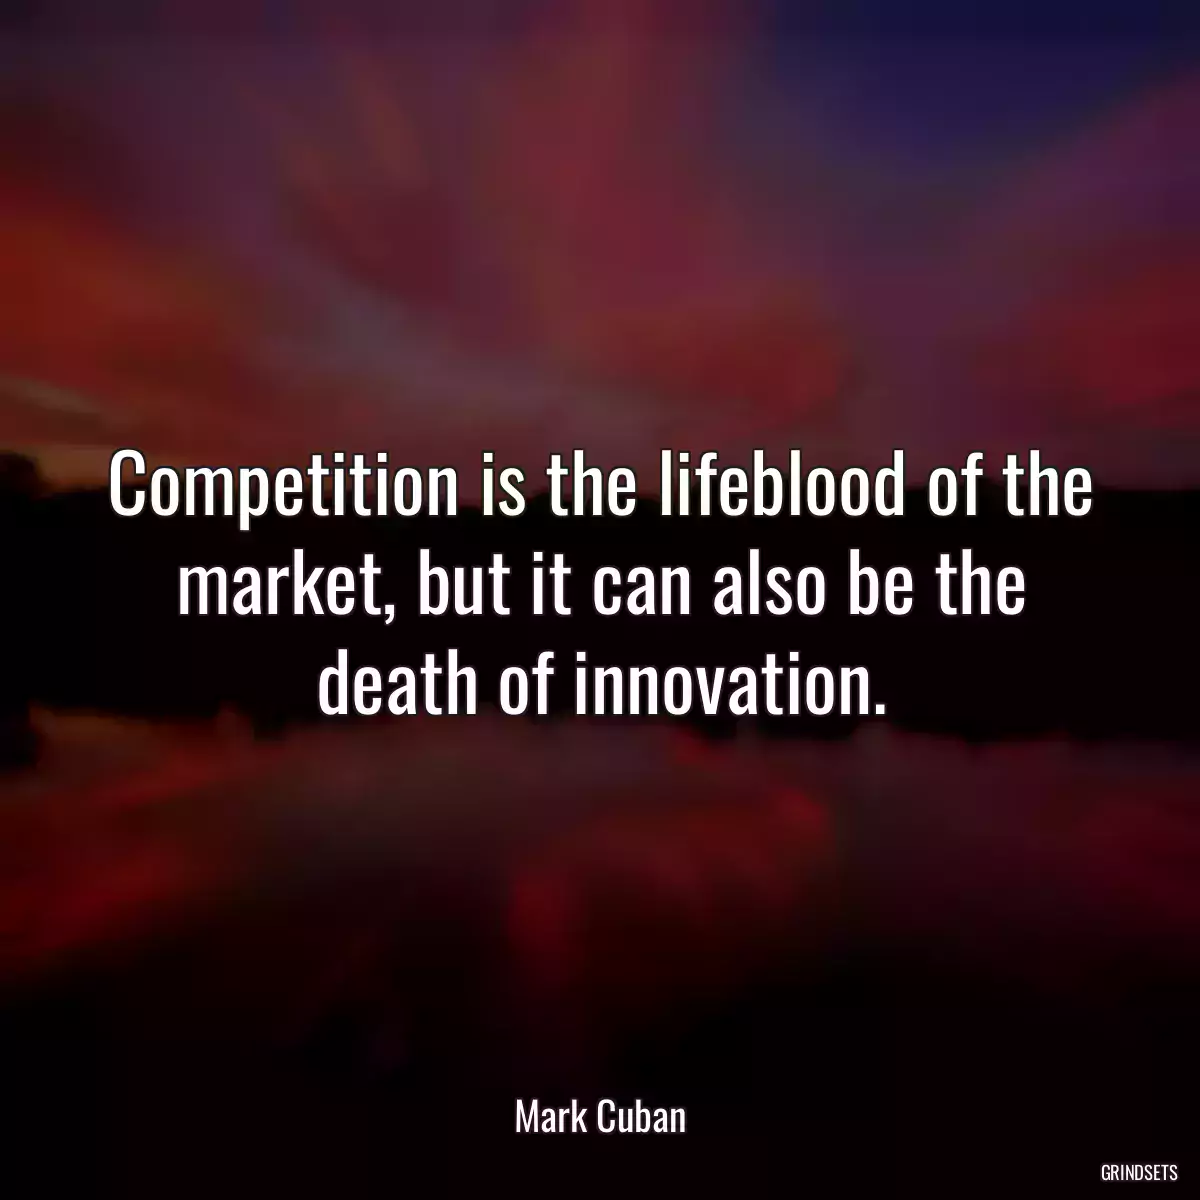 Competition is the lifeblood of the market, but it can also be the death of innovation.